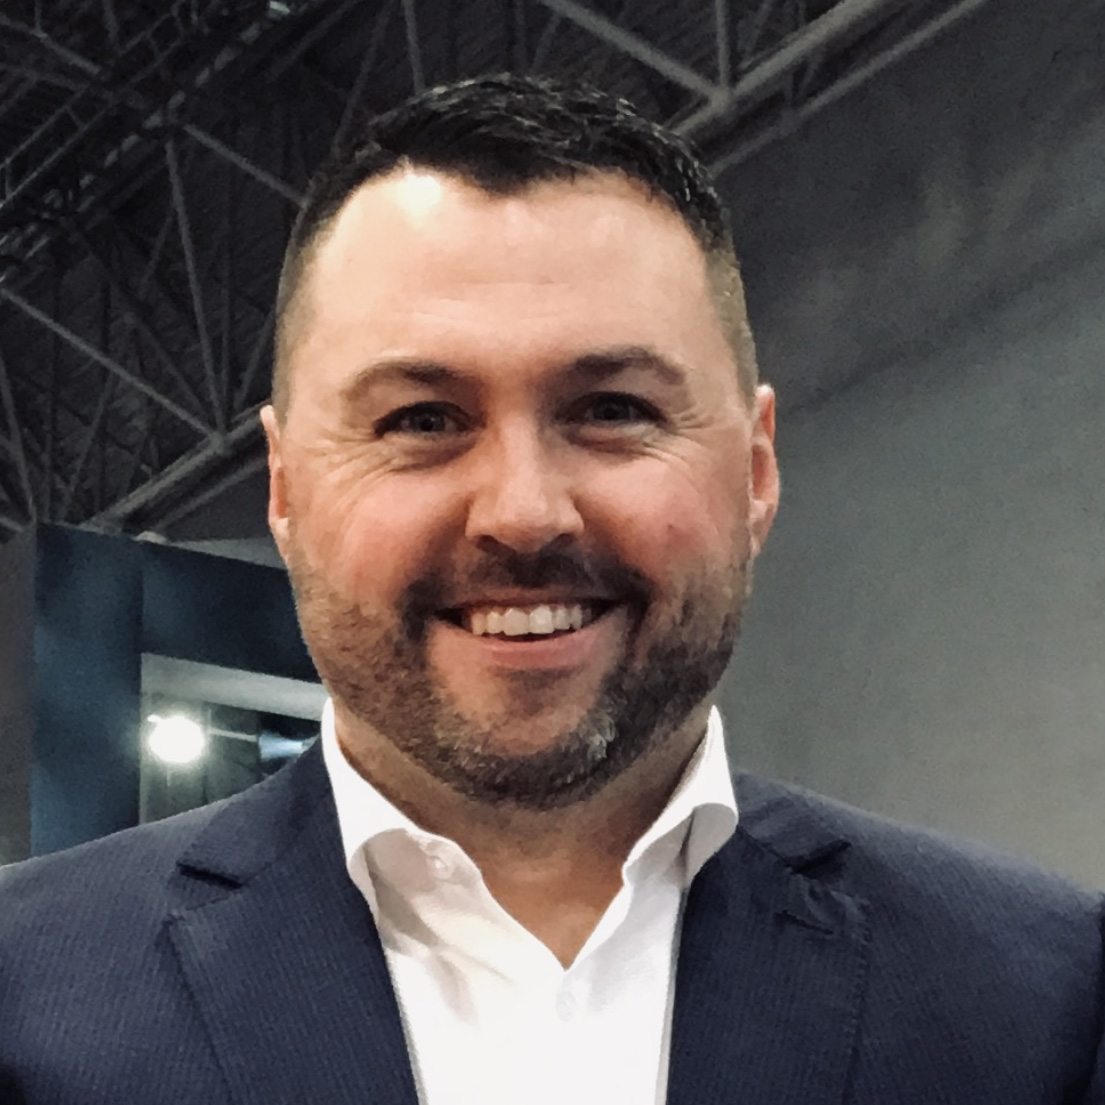 MOREL Eyewear Welcomes Zachary Milam as National Sales Director